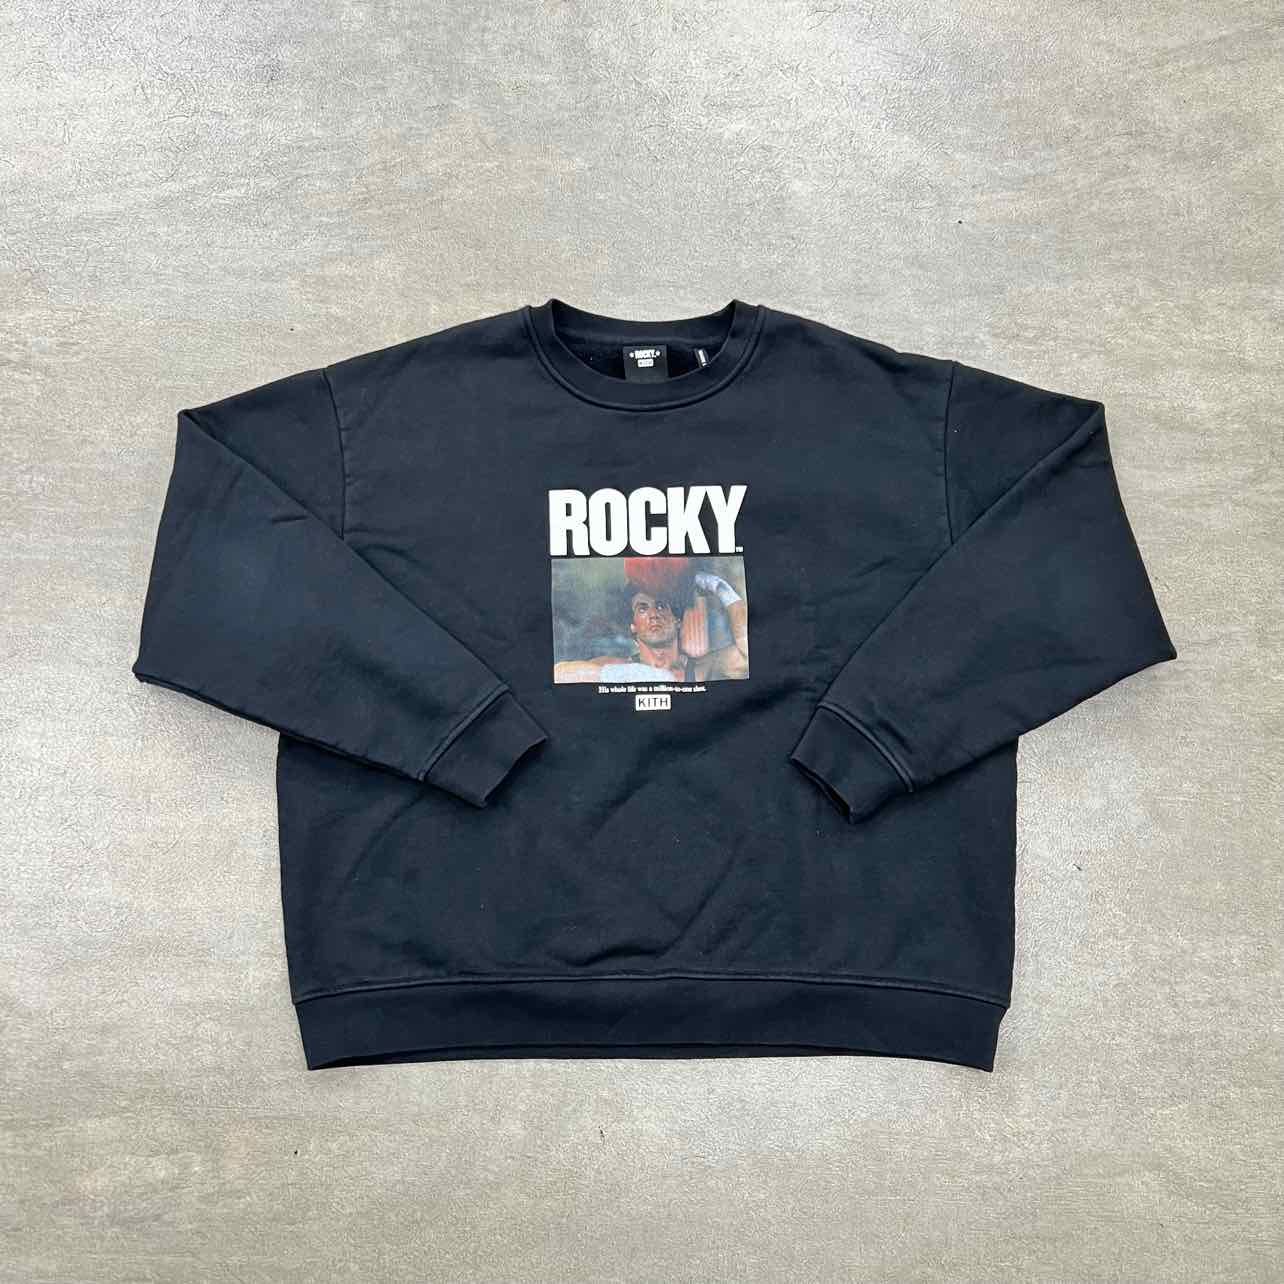 Kith Crewneck Sweater &quot;ROCKY MILLION TO ONE&quot; Black Used Size 2XL